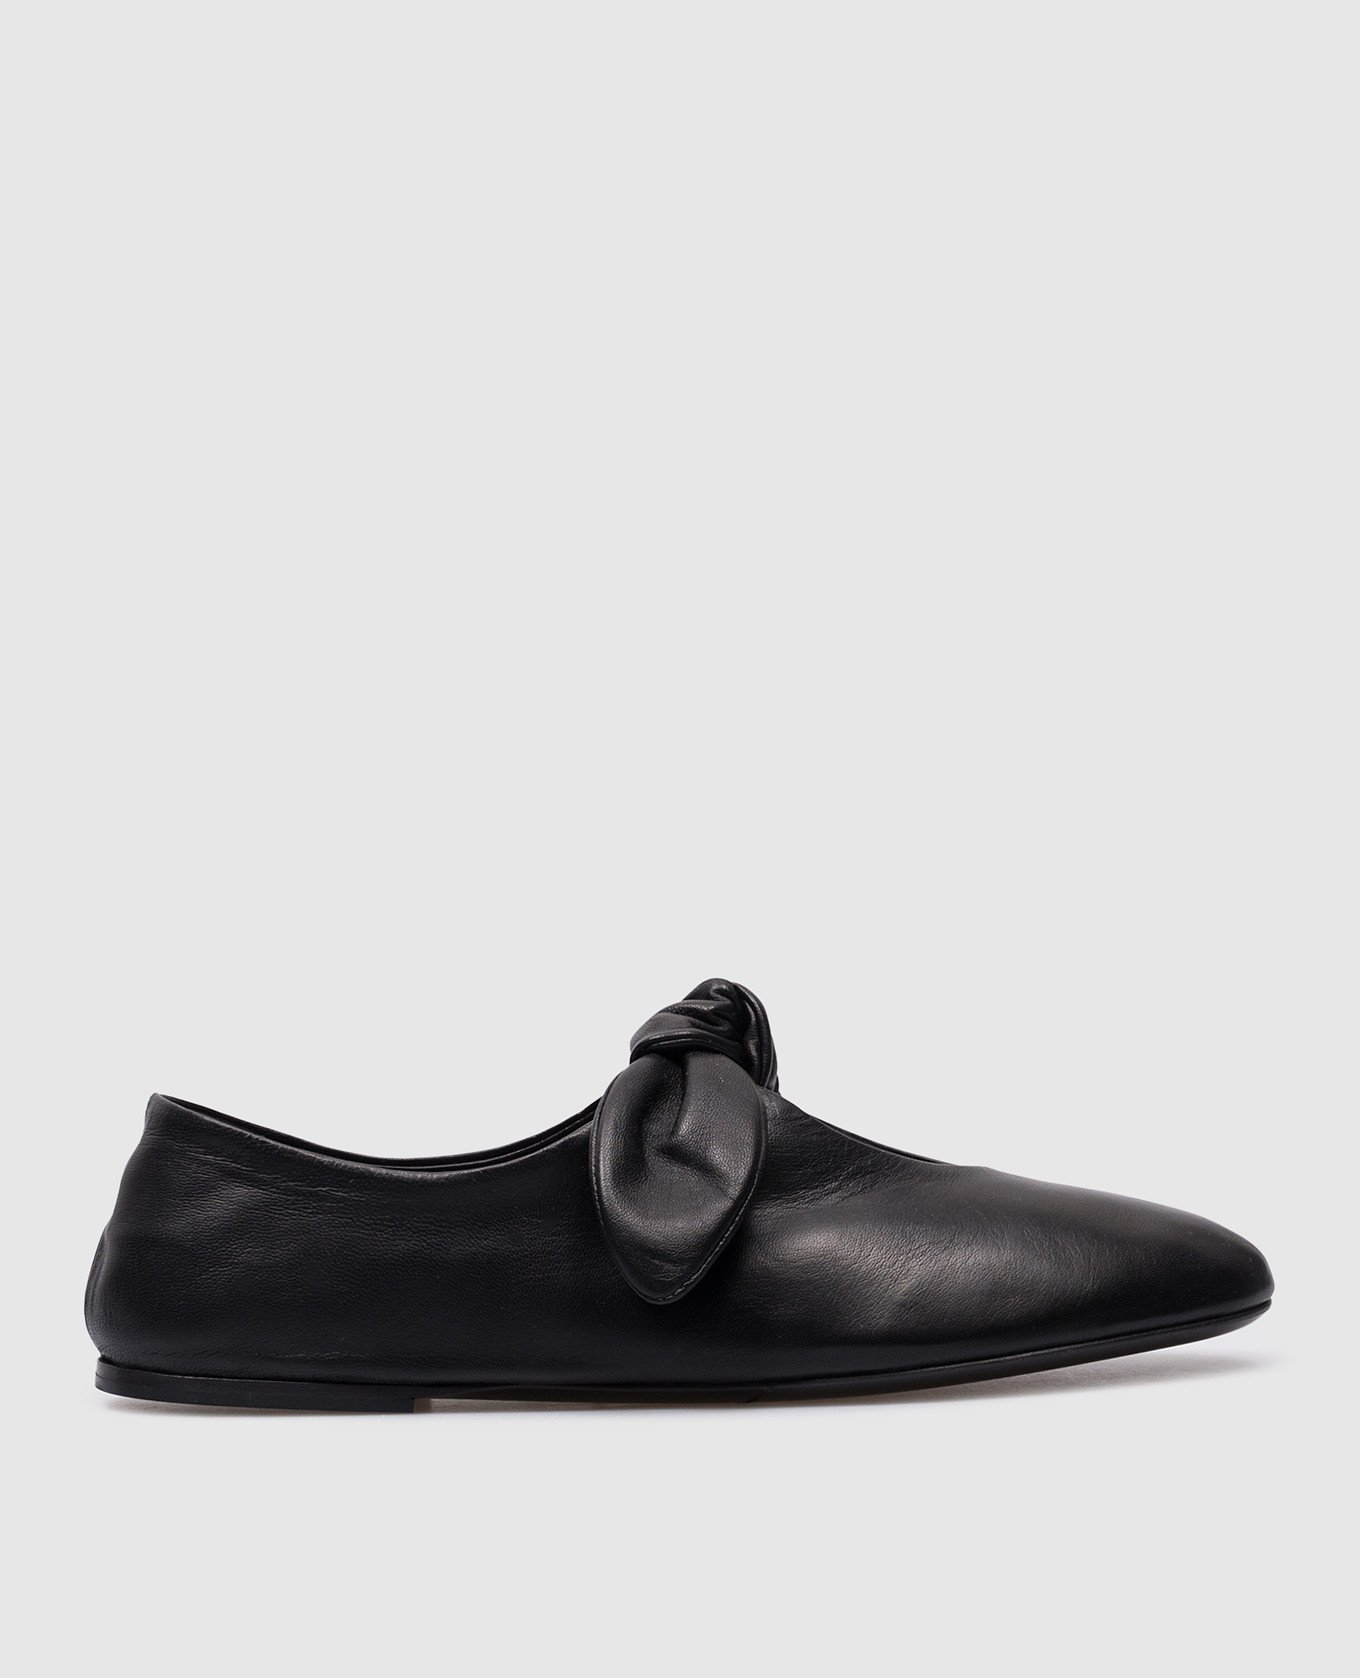 Black leather ballet flats with a bow